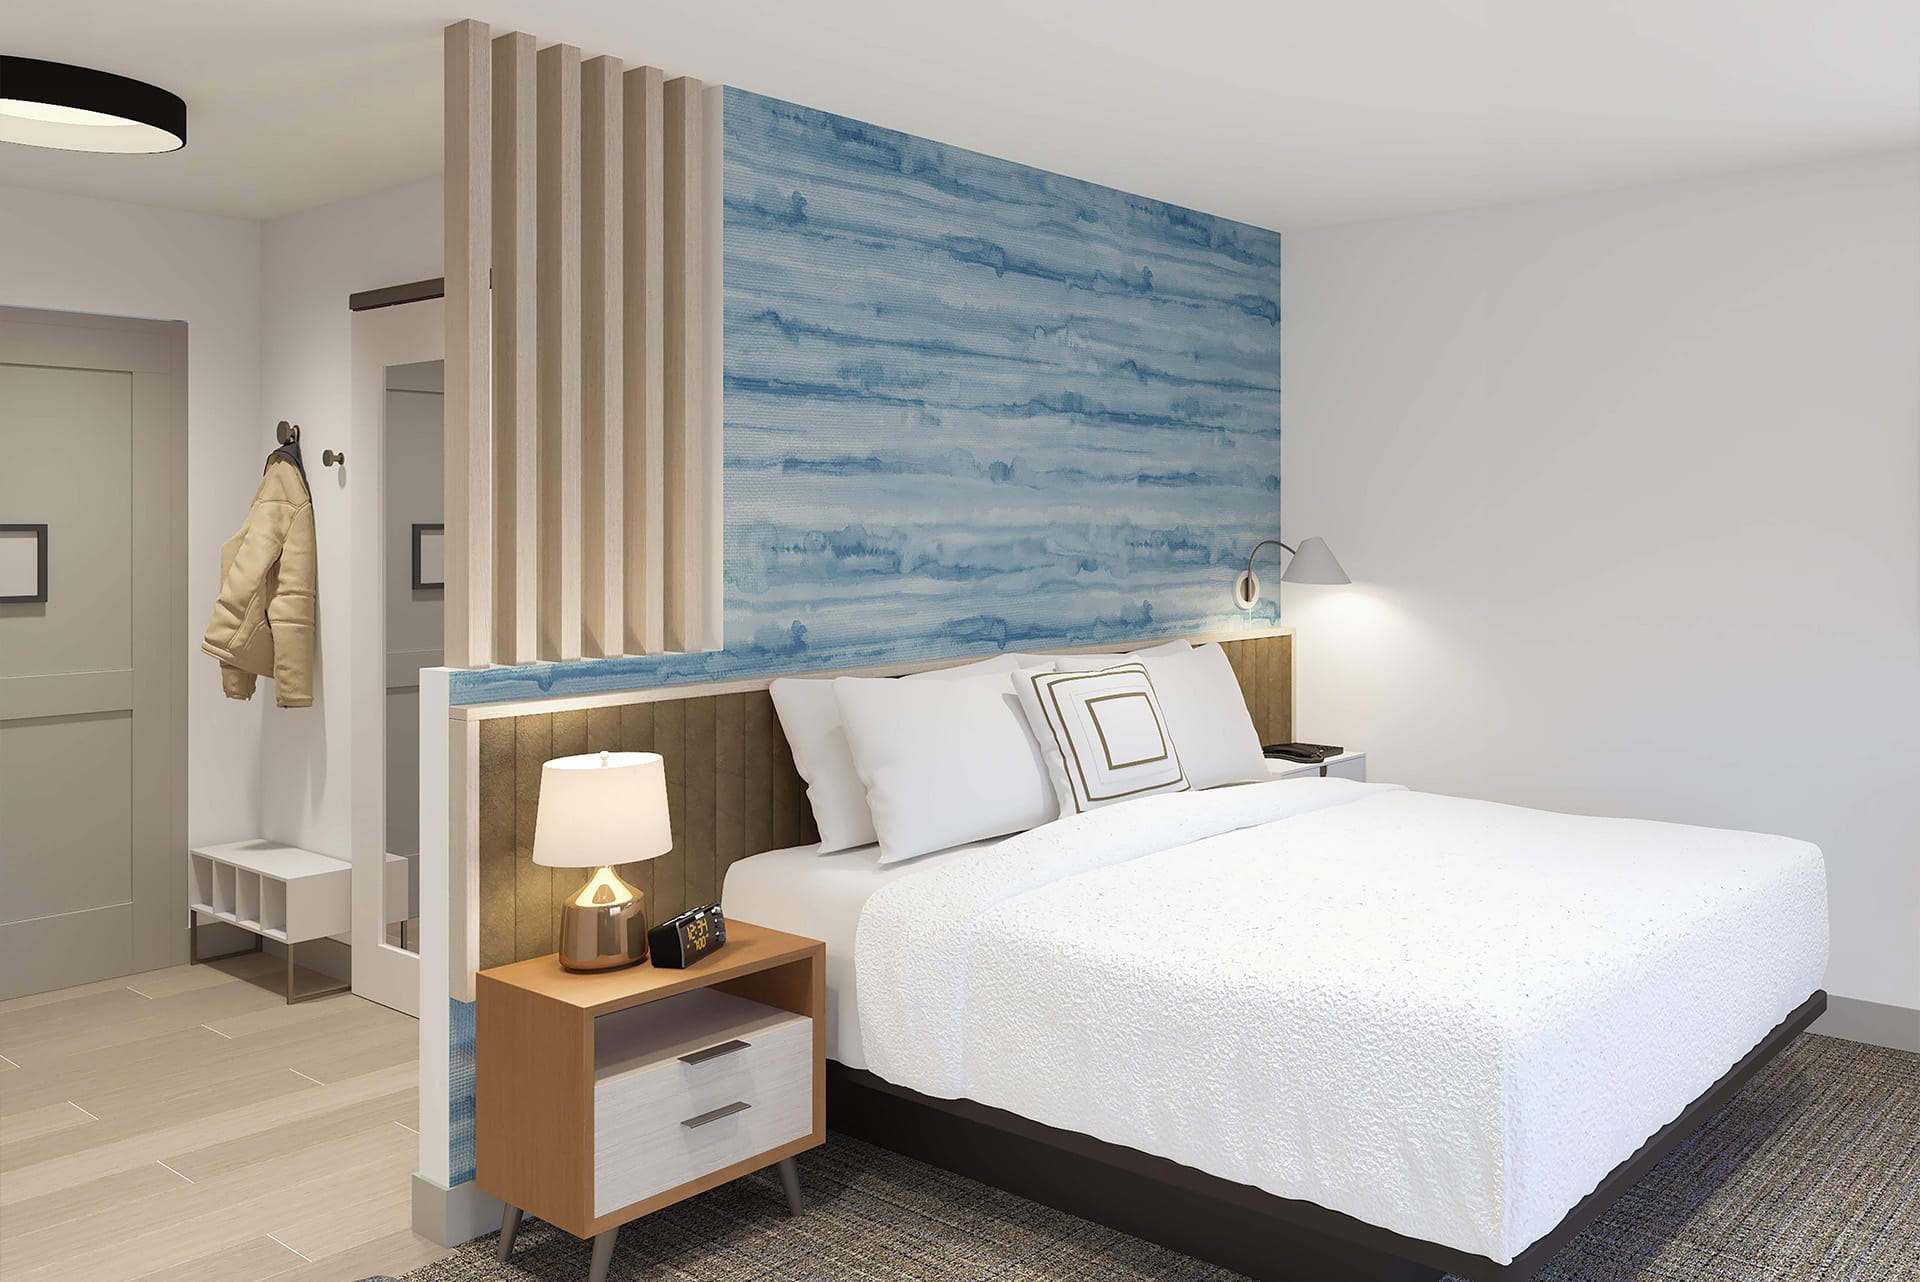 fairfield inn and suites architecture and interior design